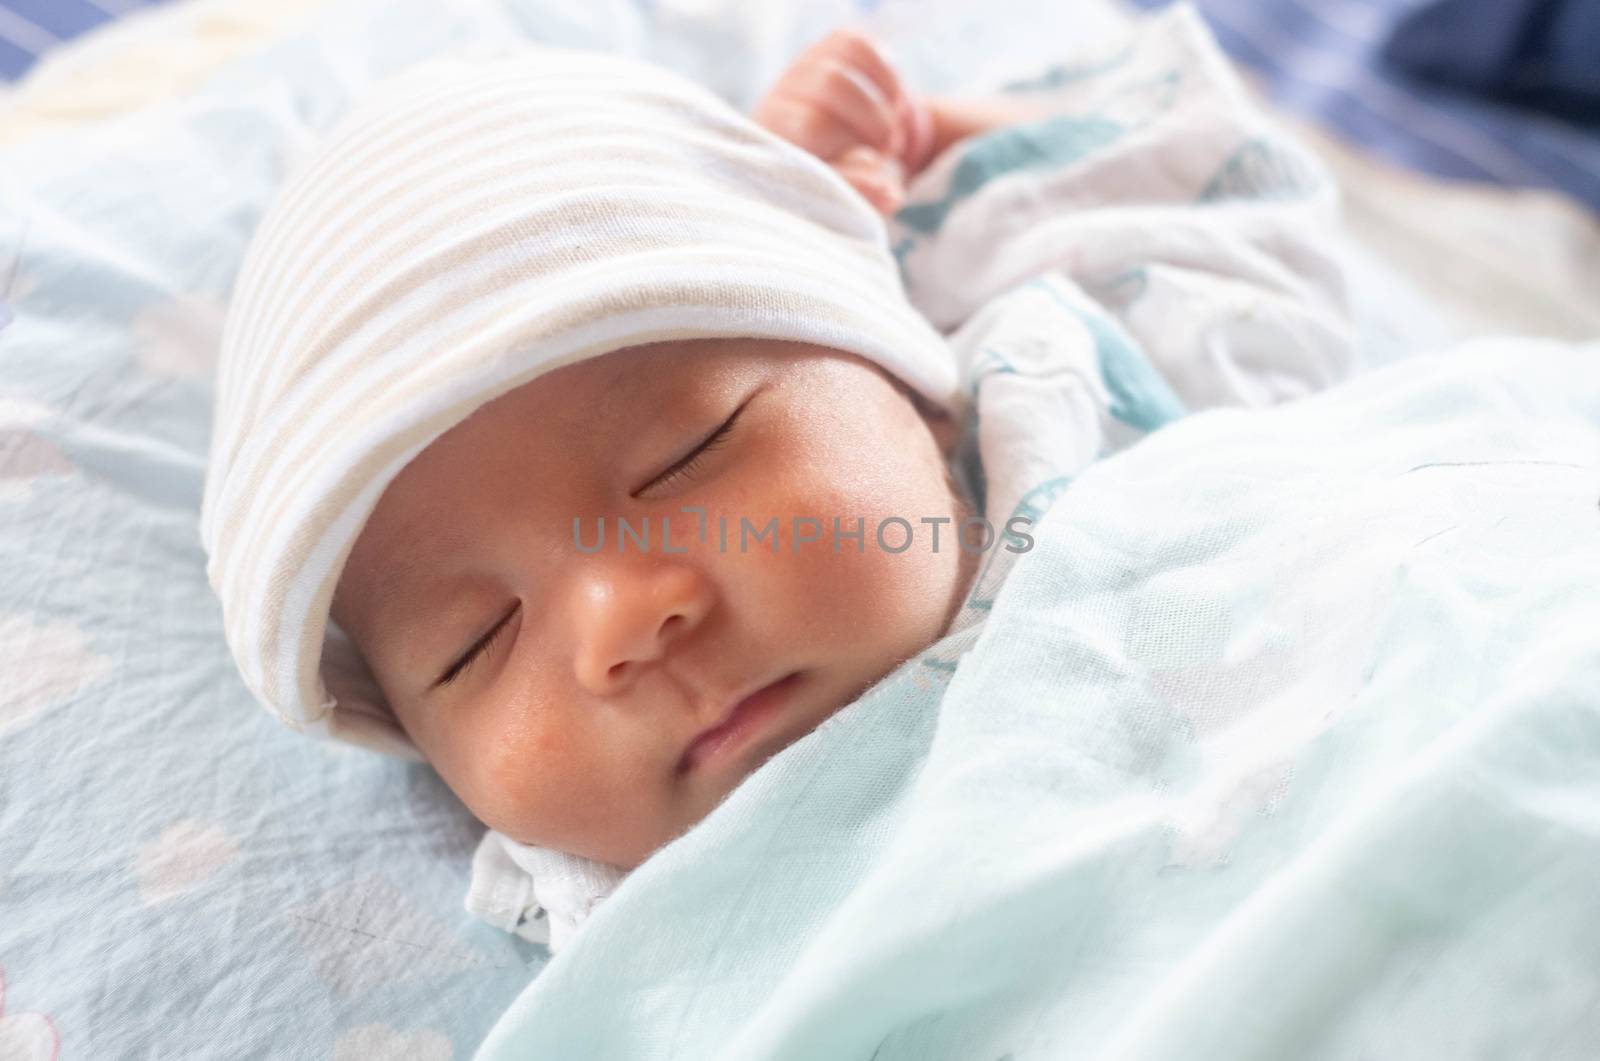 The Sleeping cute New Born Baby infant with hat  on the bed by Bonn2210